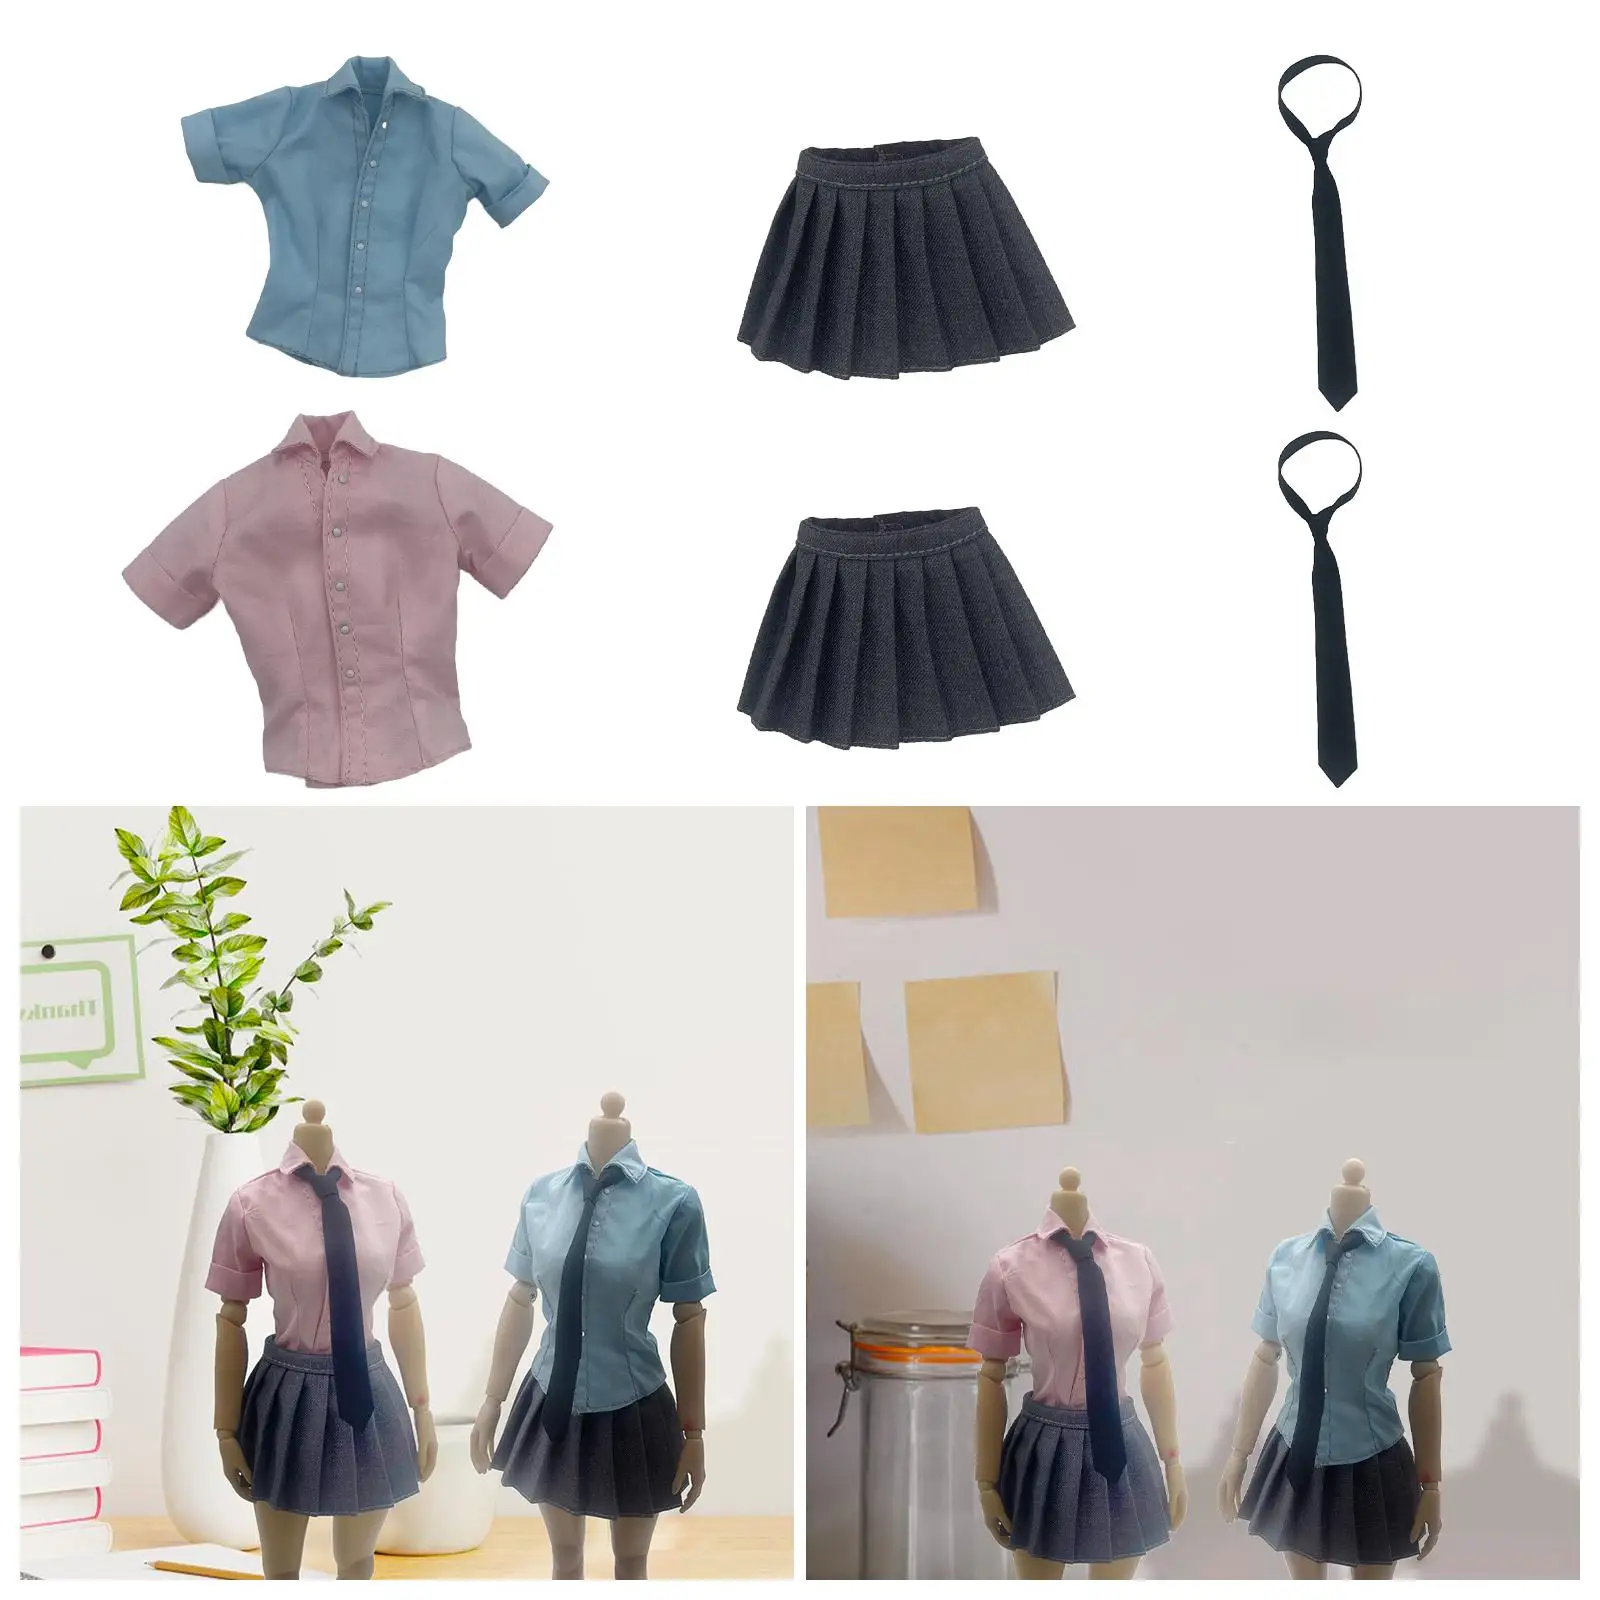 1/6 Scale Female Shirt Action Figures Skirt Doll Tie Clothing for Stage Show Gifts